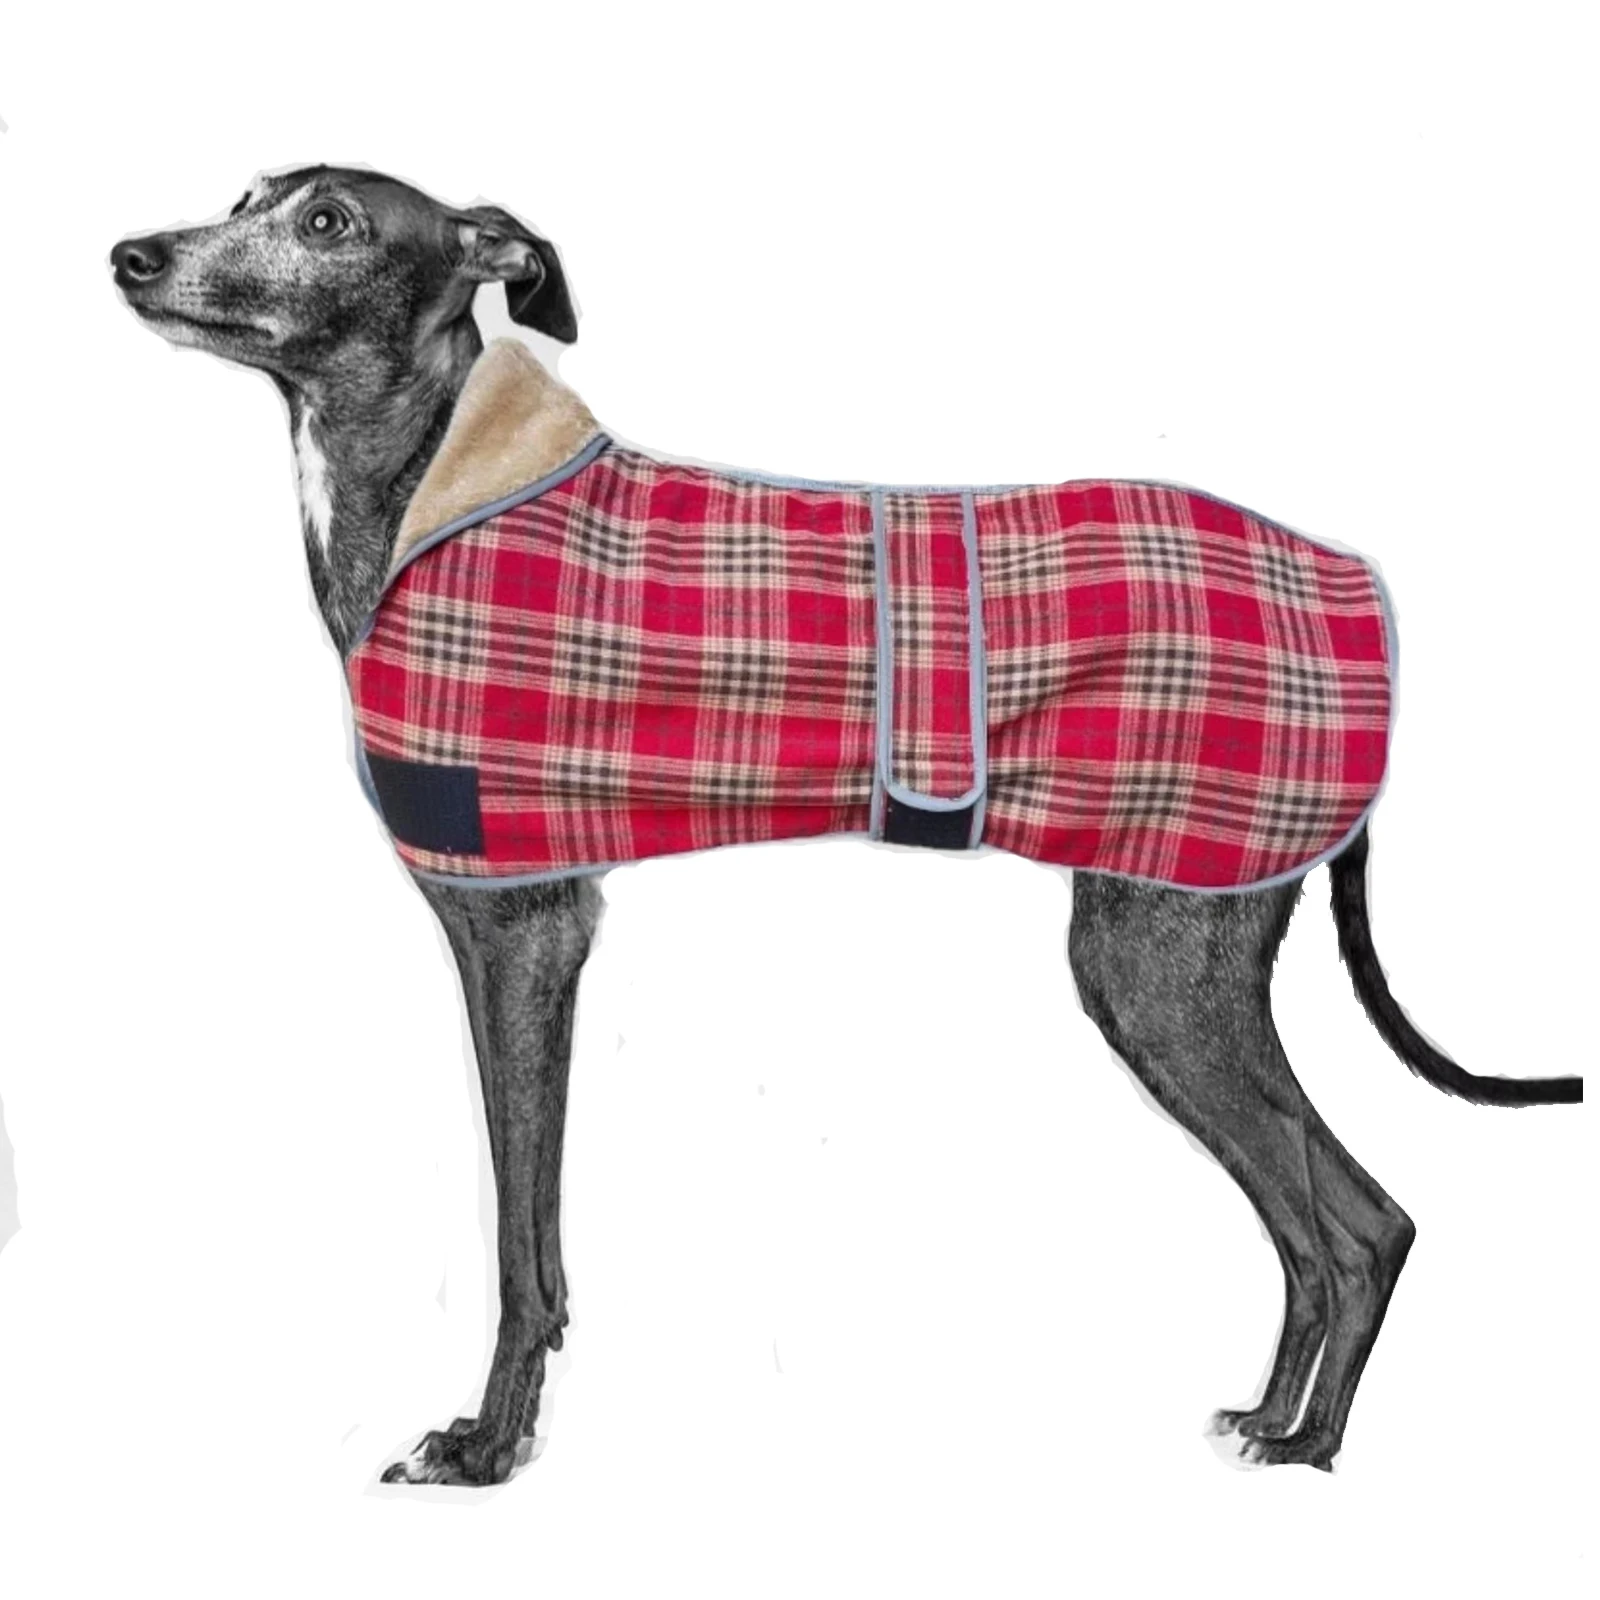 

Winter Dog Coat Reflective Warm Dog Clothes for Medium Large Dogs British Style Plaid Thicken Fleece Pet Jacket for Cold Weather